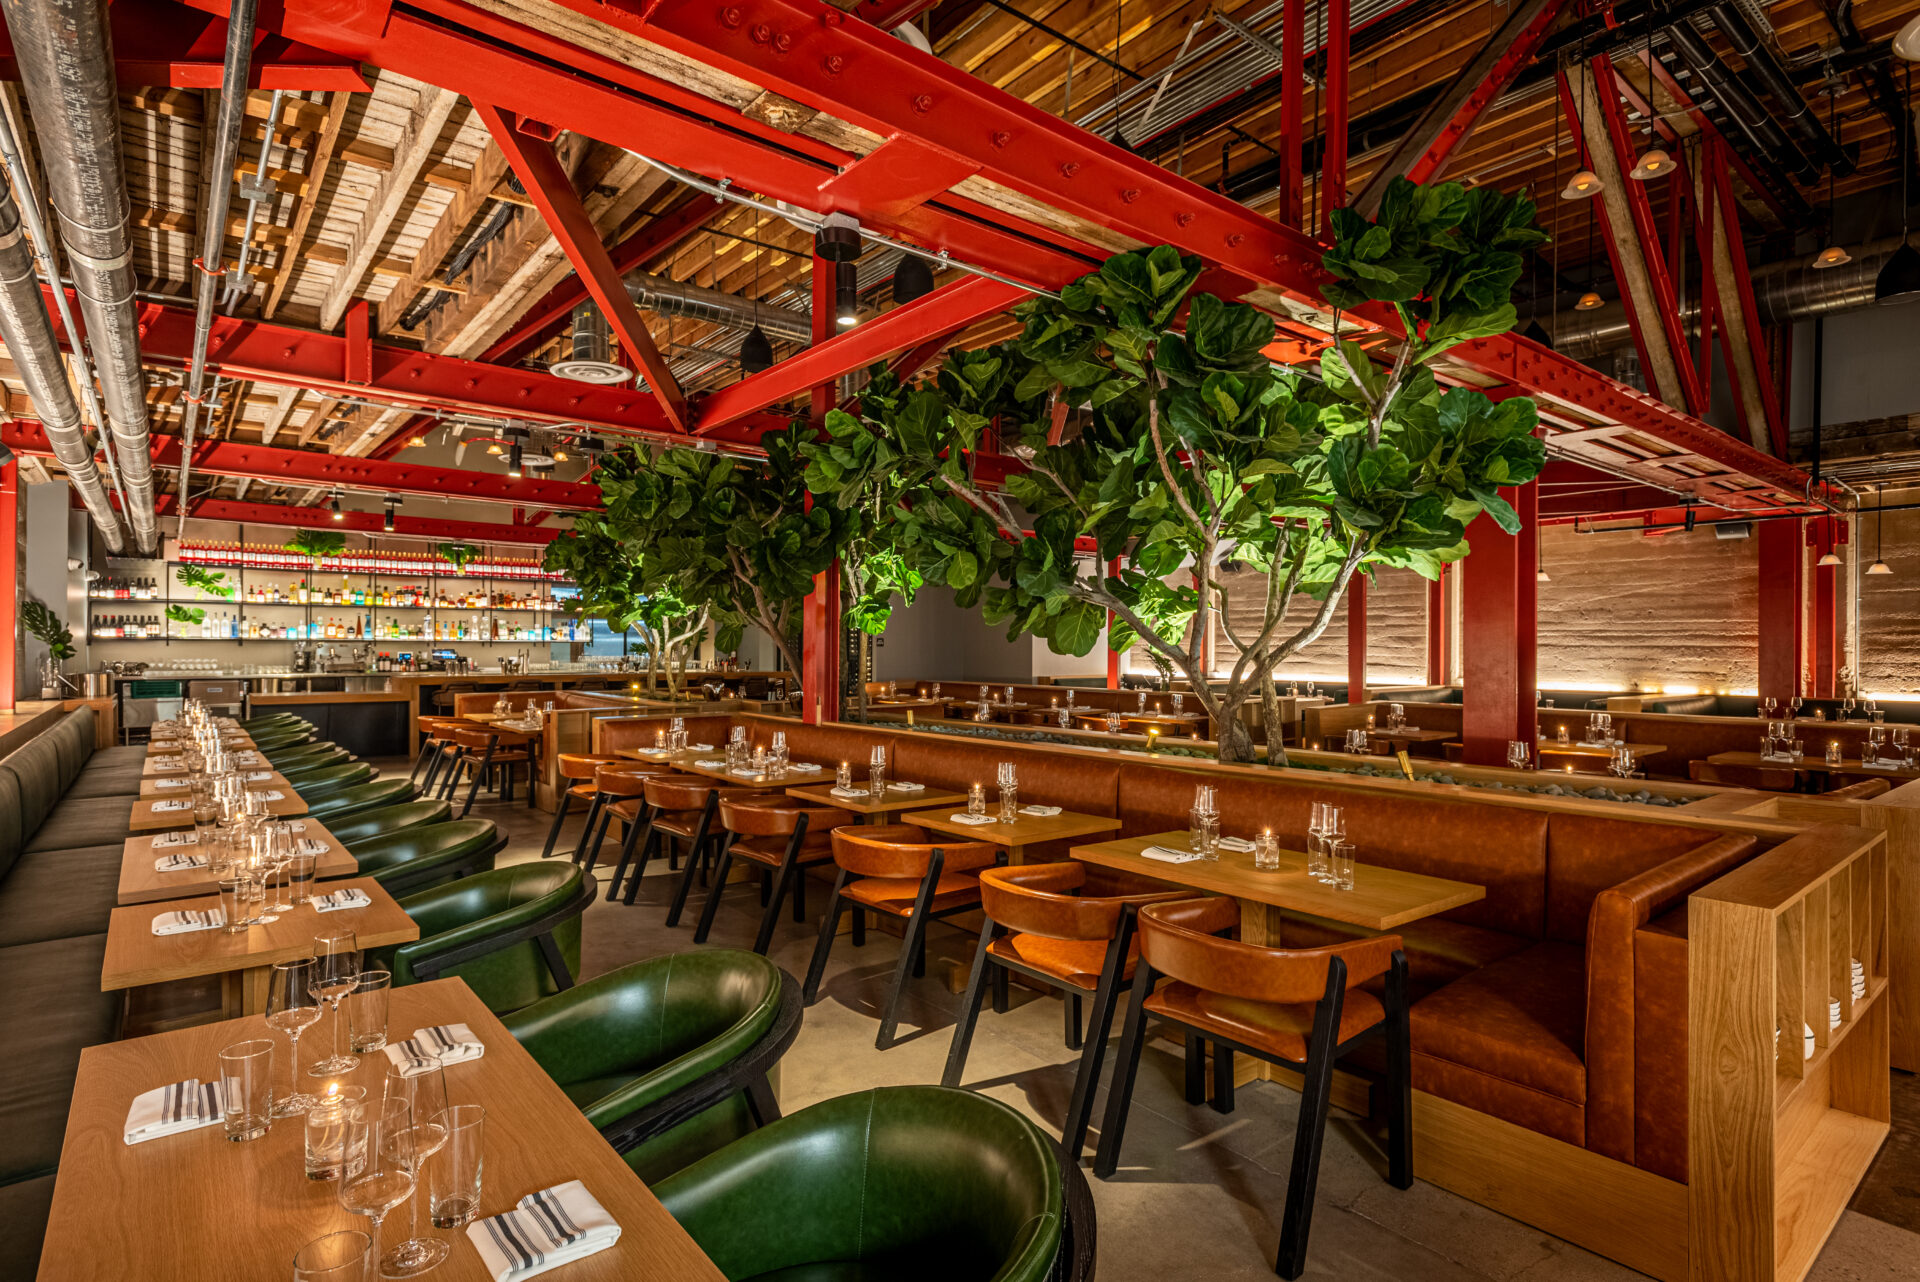 LA's best restaurants | The dining room at Grand Master Recorders, with a red steel framed ceiling, large indoor trees, and rows of square tables with arm chairs